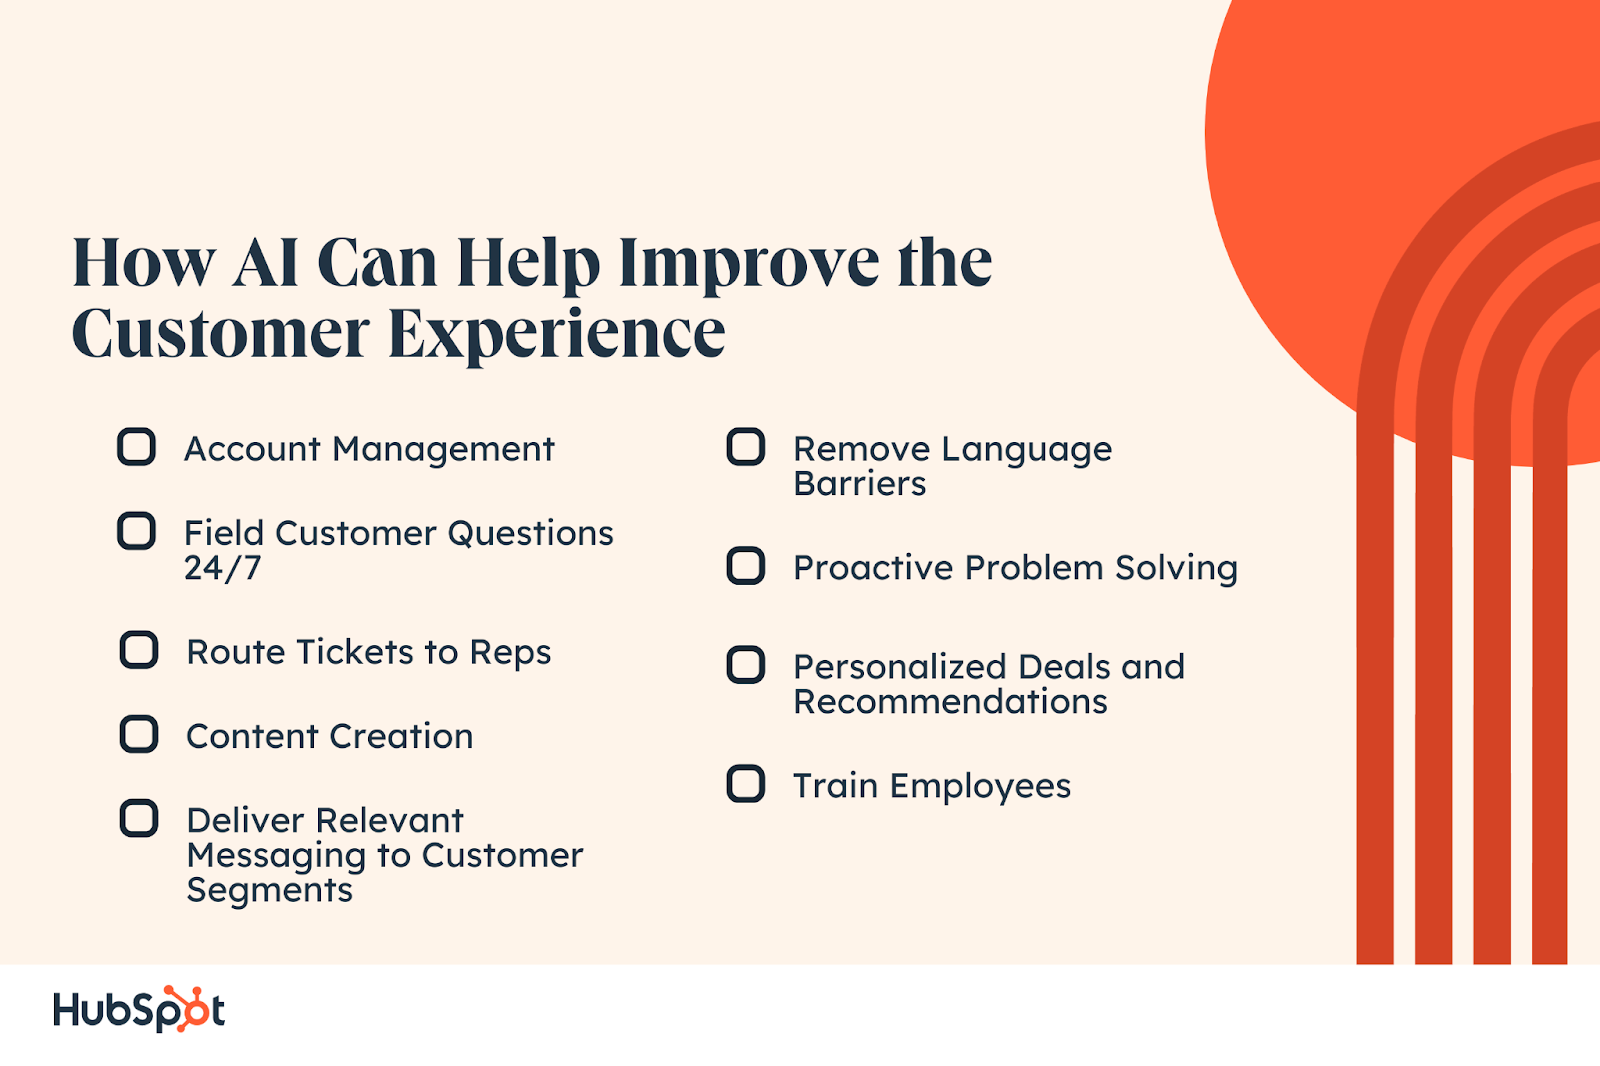 How AI Can Help Improve the Customer Experience. Account Management. Field Customer Questions 24/7. Route Tickets to Reps. Content Creation. Remove Language Barriers. Proactive Problem Solving. Personalized Deals and Recommendations. Train Employees. Deliver Relevant Messaging to Customer Segments